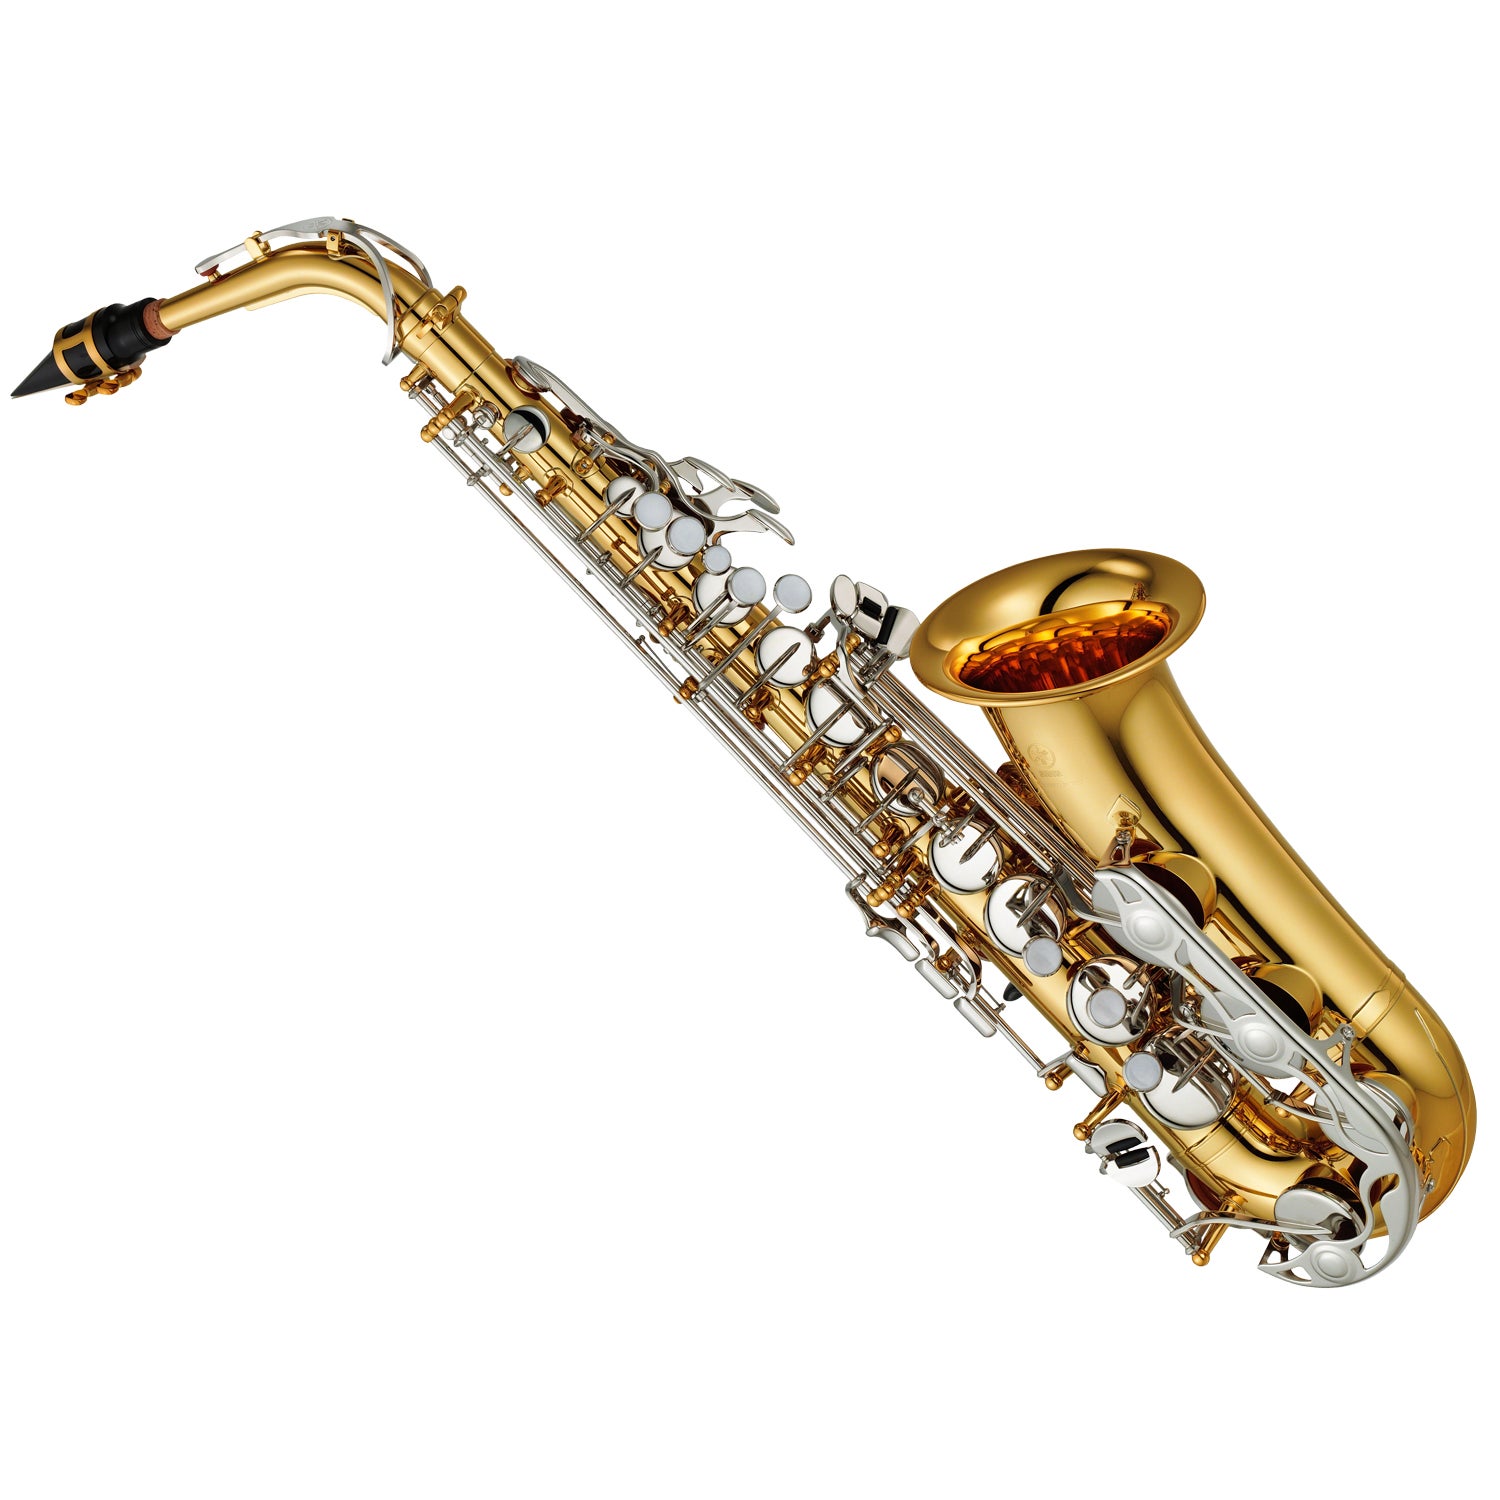 https://www.musicworks.co.nz/content/products/yamaha-yas26-alto-saxophone-gold-lacquer-student-1-yas26.jpg?canvas=1:1&width=2500